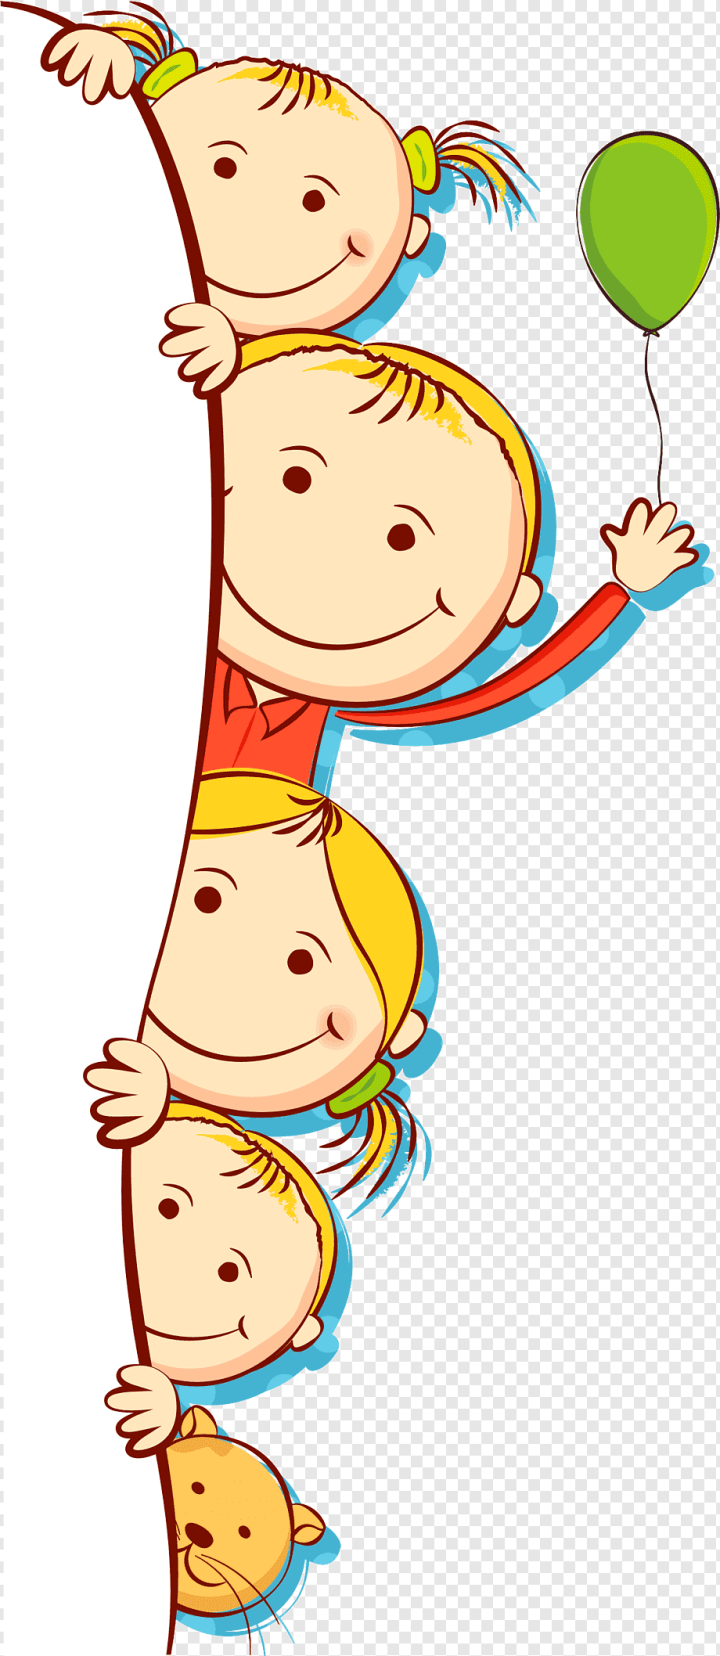 cartoon Character,text,people,head,cartoons,childrens Day,cartoon Eyes,text Box,kindergarten,line,male,school Children,smile,happiness,festival,chinoiserie,art,artwork,background,background Box,balloon Cartoon,black And White,box,boy Cartoon,cartoon Couple,area,Child,Cartoon,Poster,Children,png,transparent,free download,png